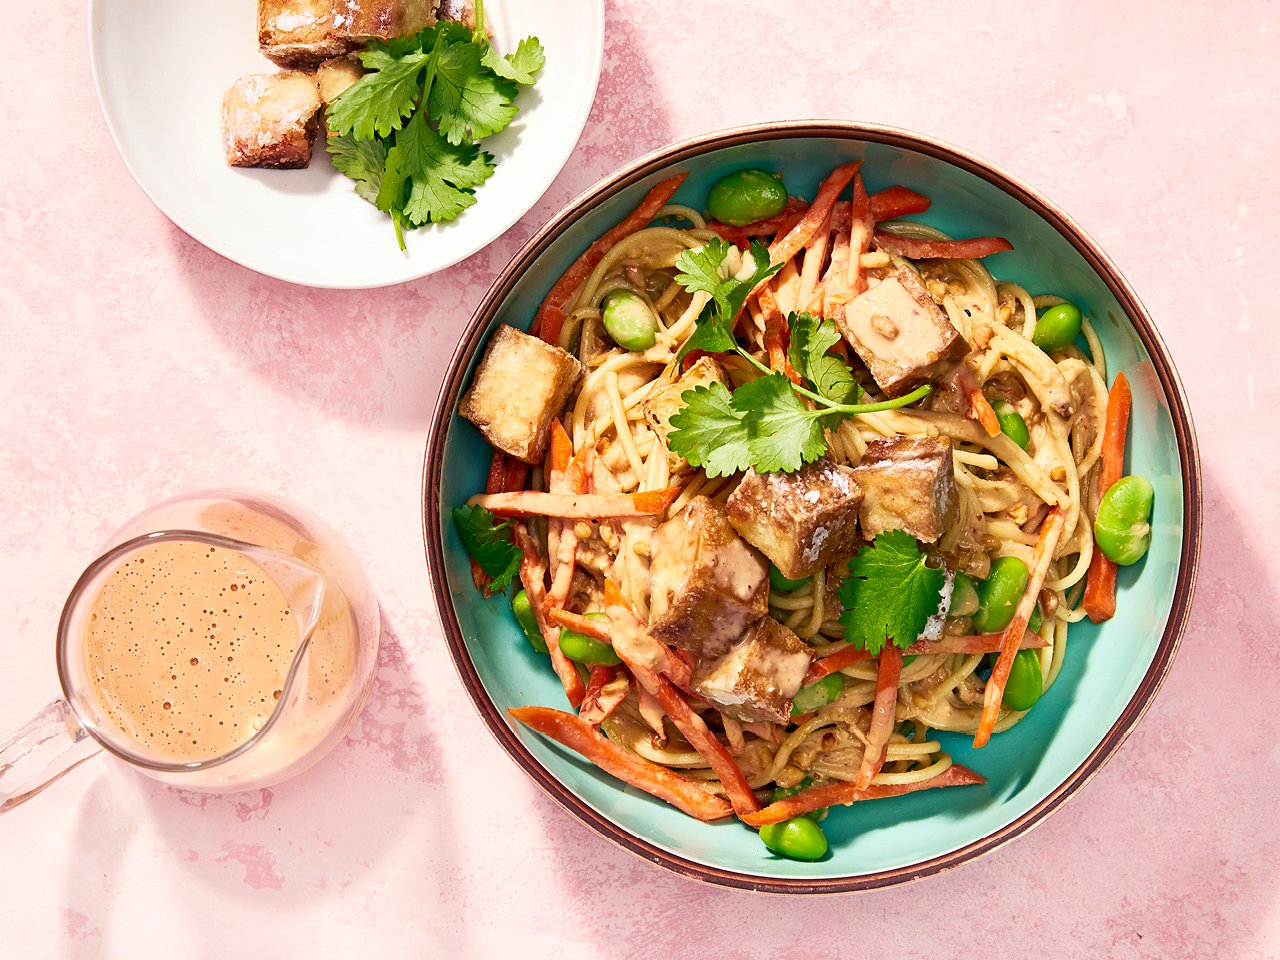 Cold, Spicy Vegan Peanut Noodles with Smoked Tofu